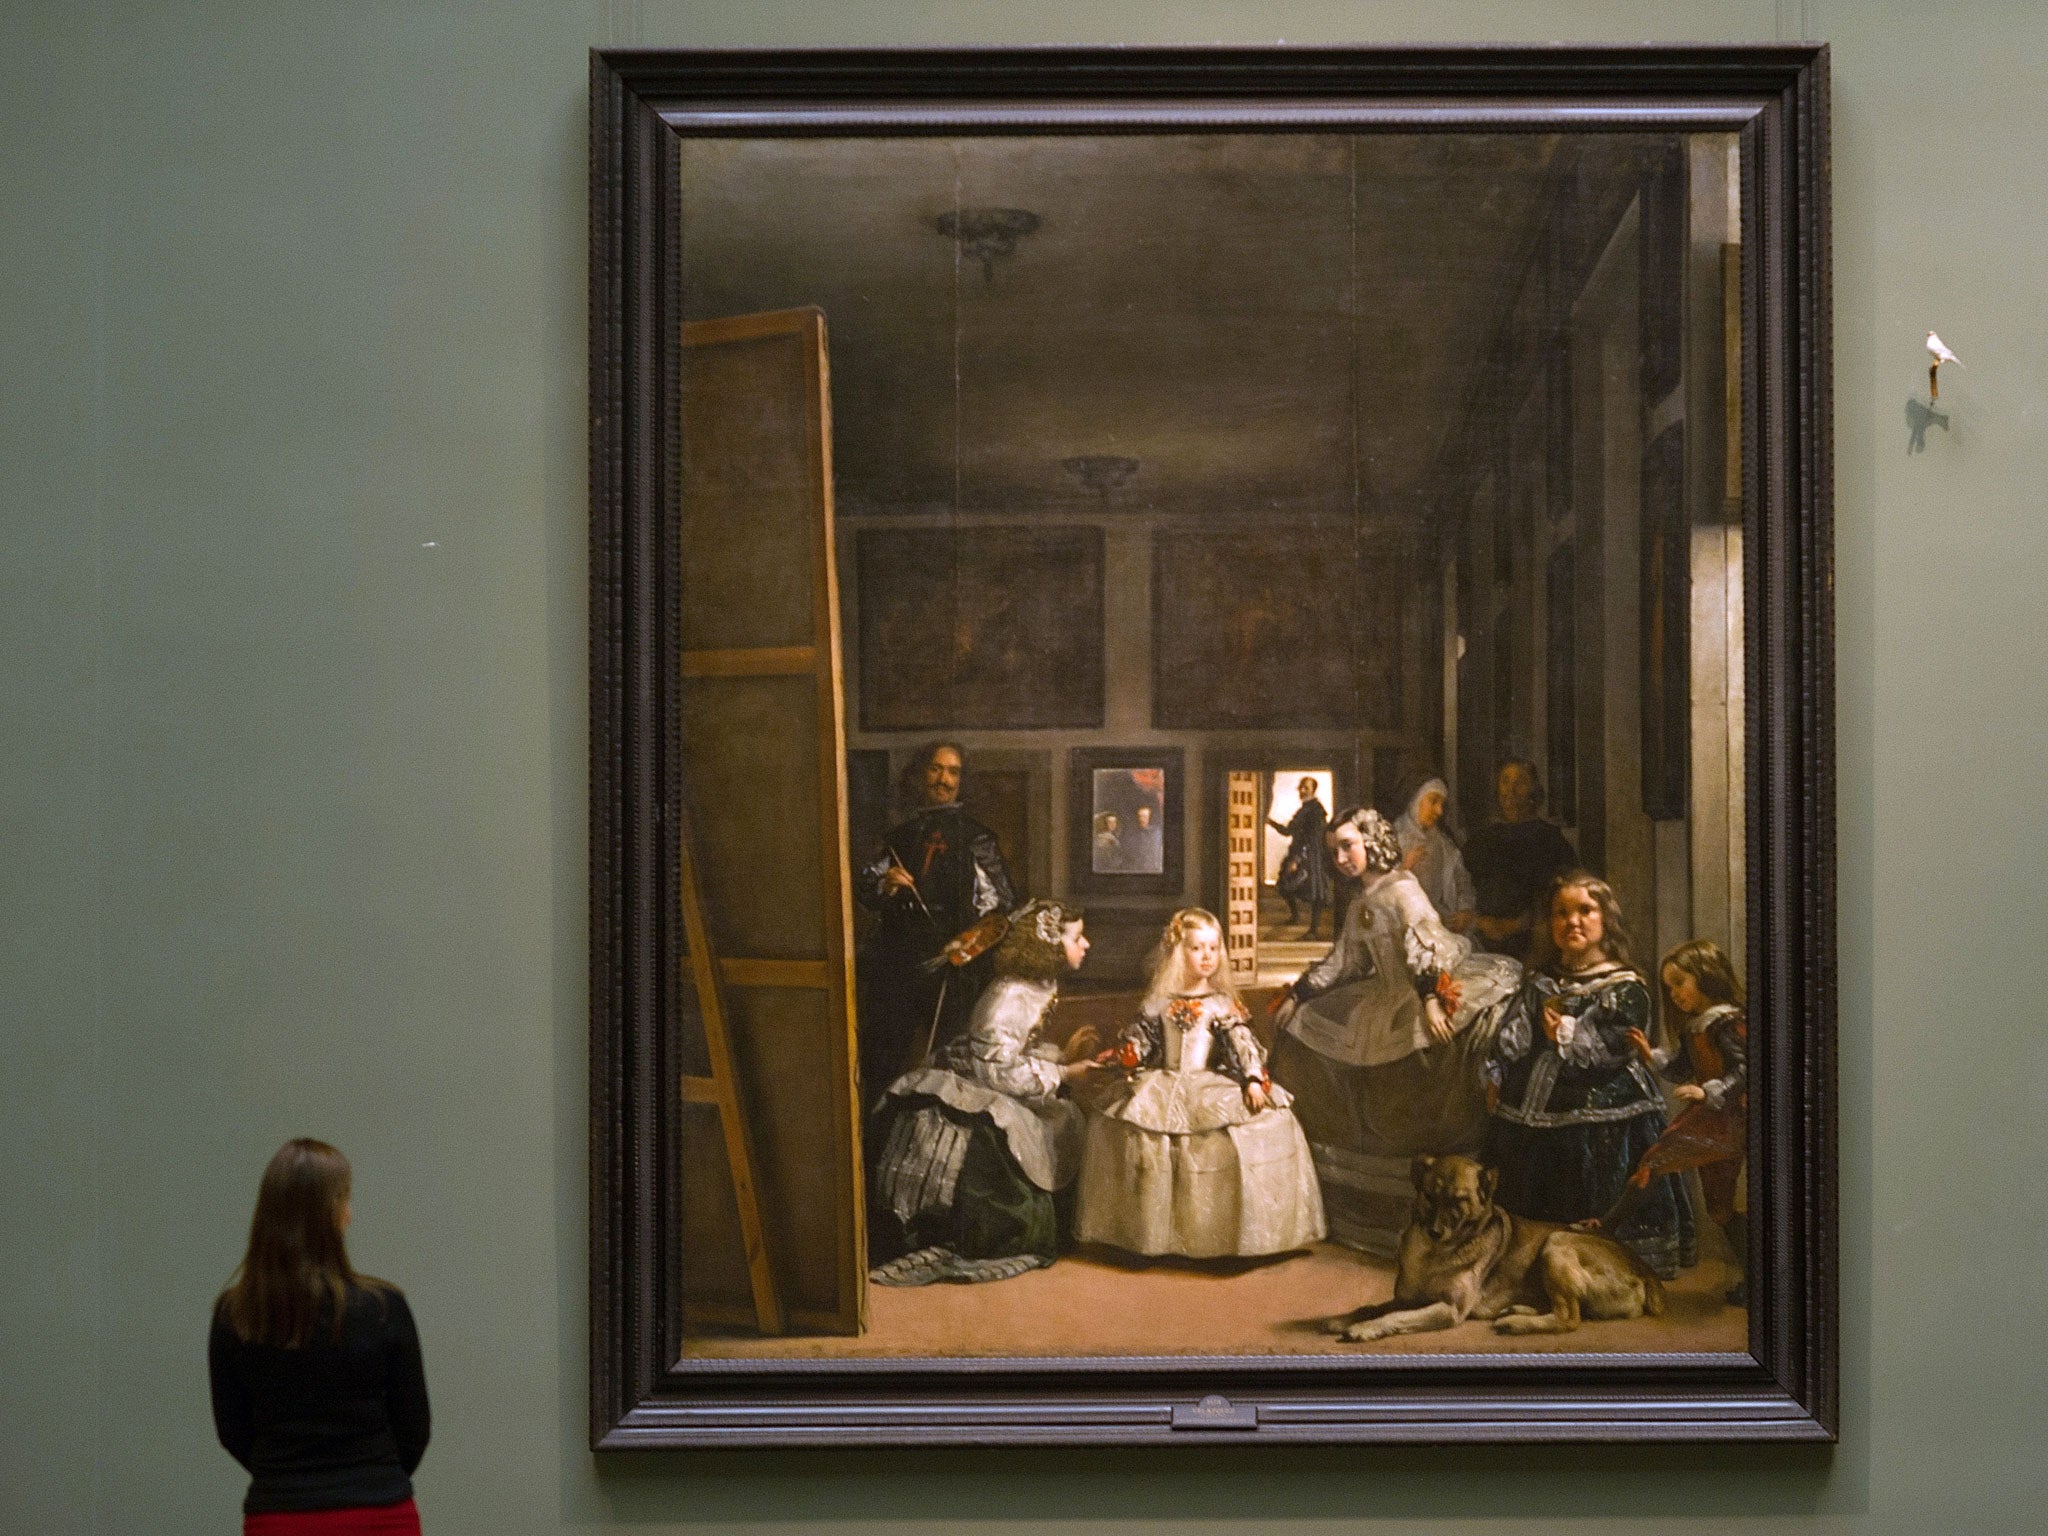 New perspectives: 'Las Meninas', or 'The Family of Philip IV', (c. 1656) by Velazquez